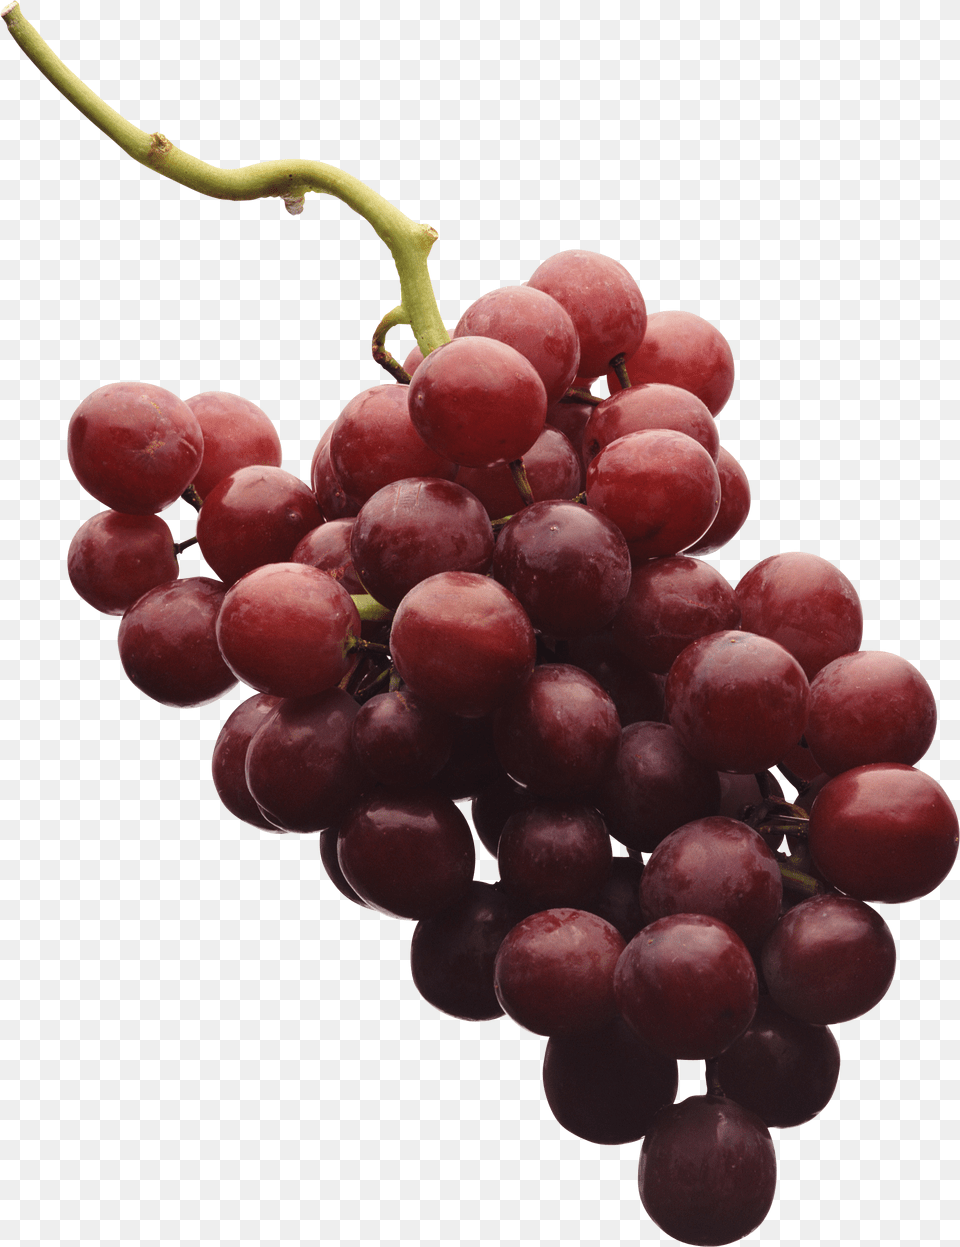 Red Grapes Image For Download Grape, Food, Fruit, Plant, Produce Free Transparent Png